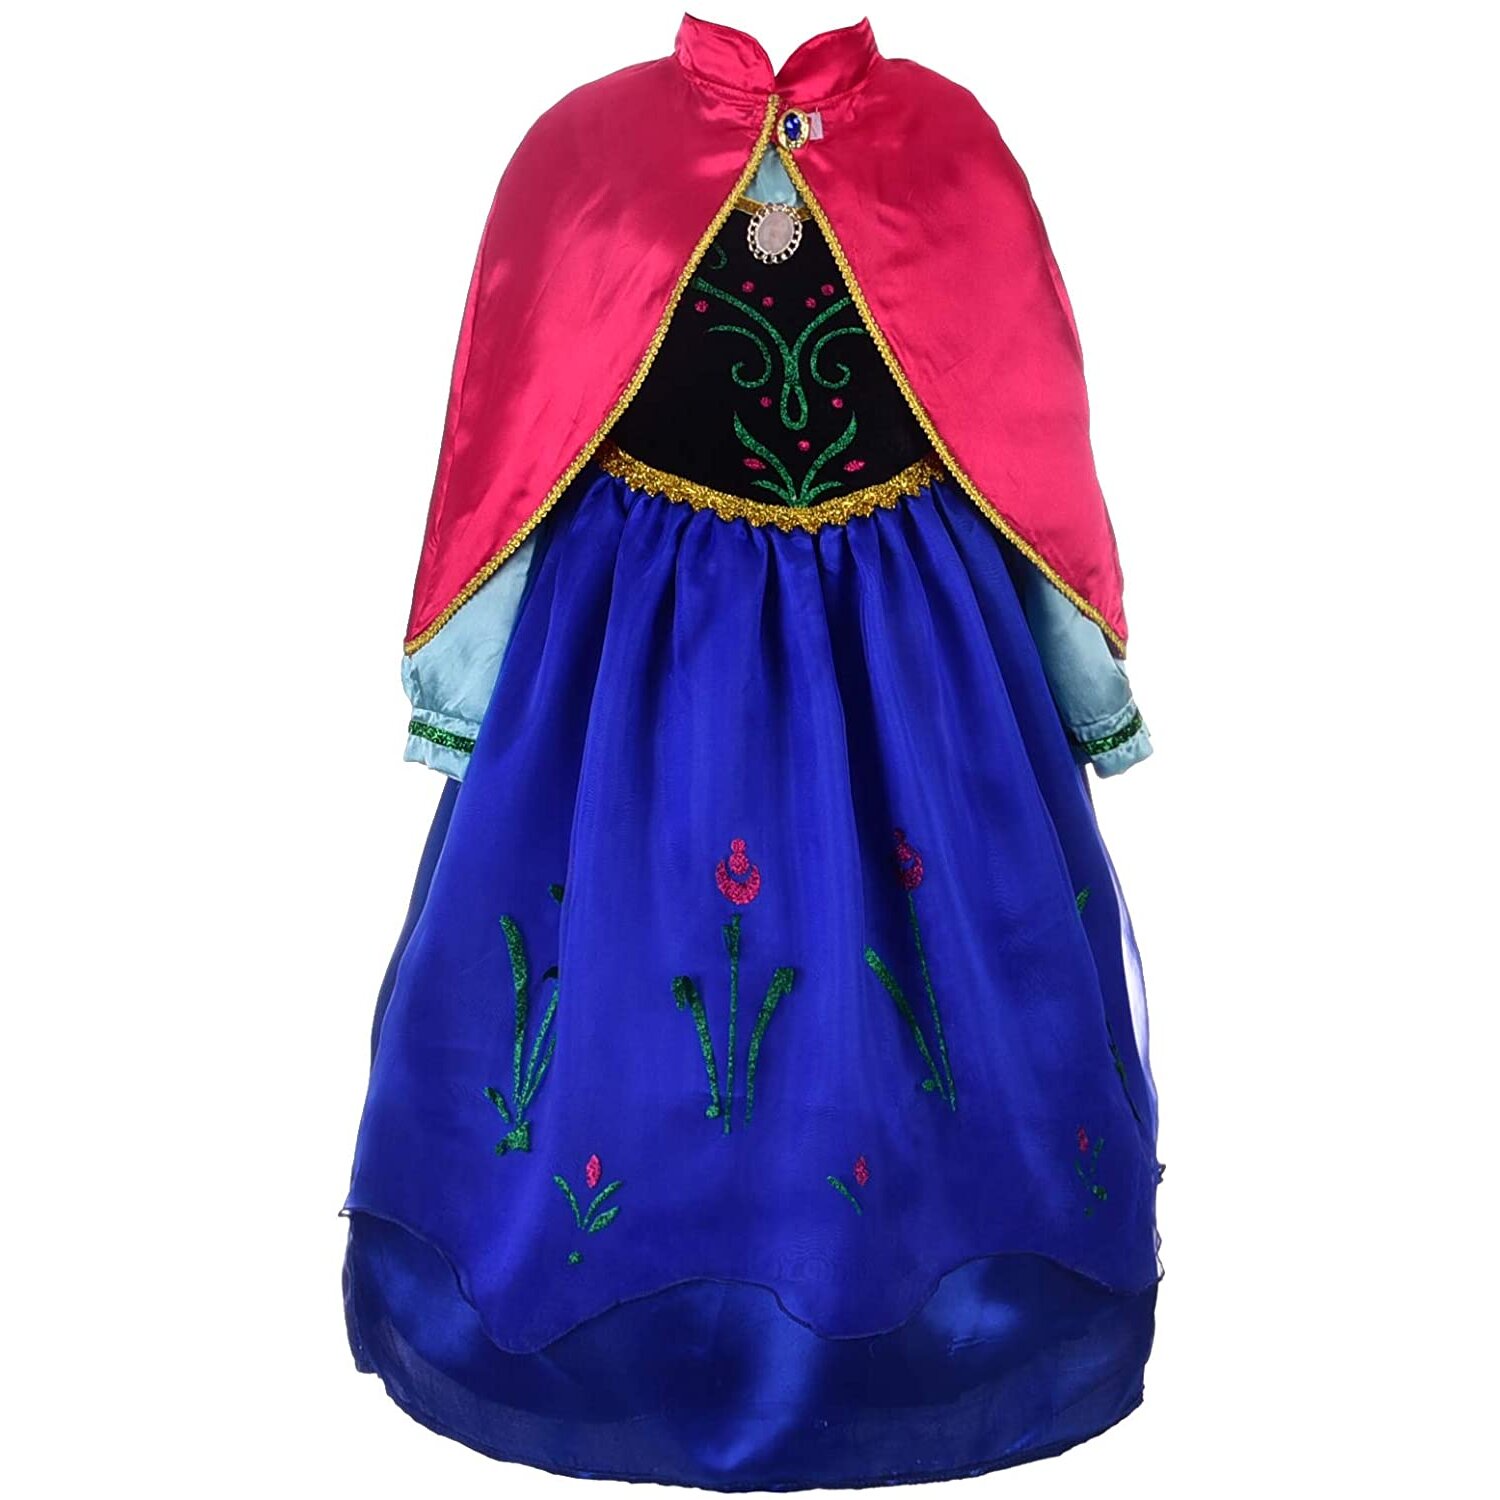 Lito Angels Princess Anna Costume with Cape, Halloween Birthday Theme Party Fancy Dress Up, Age 2-9 Years